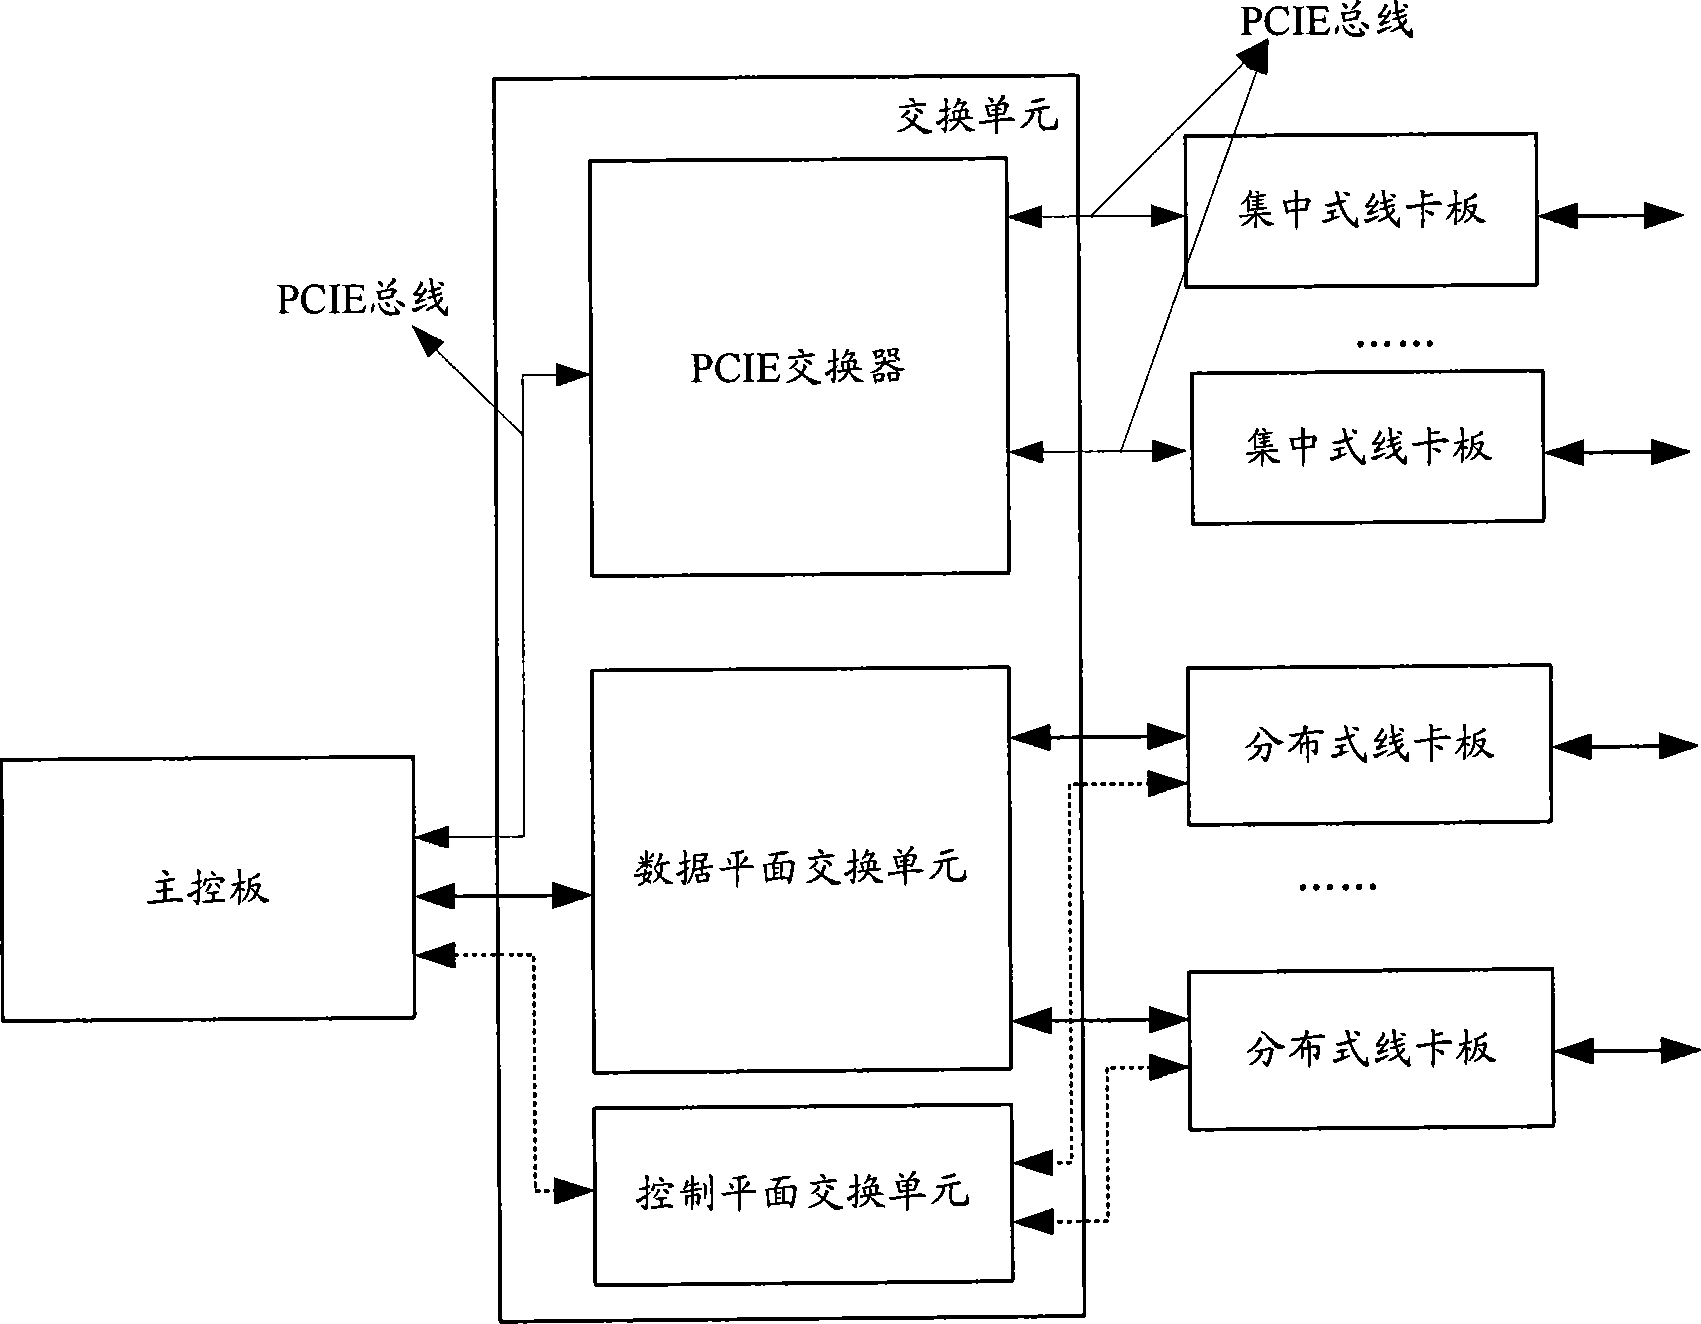 Switching network communicating system, method and master control board